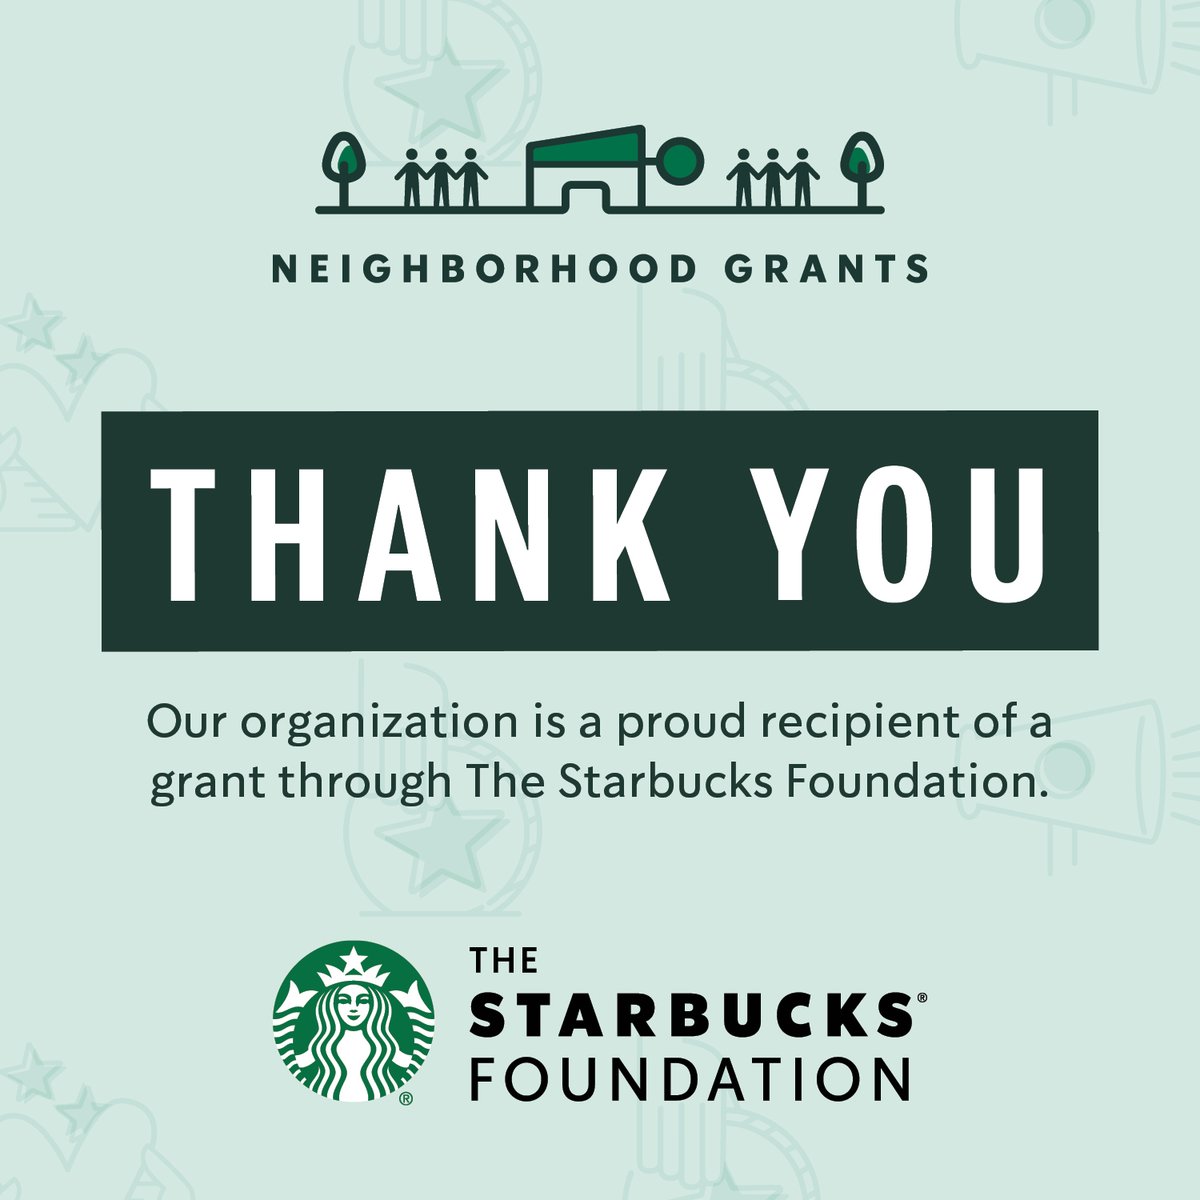 Thanks again to The @starbucks Foundation for helping us to care for our homeless neighbors in NYC and NJ. #TheStarbucksFoundation #NeighborhoodGrants